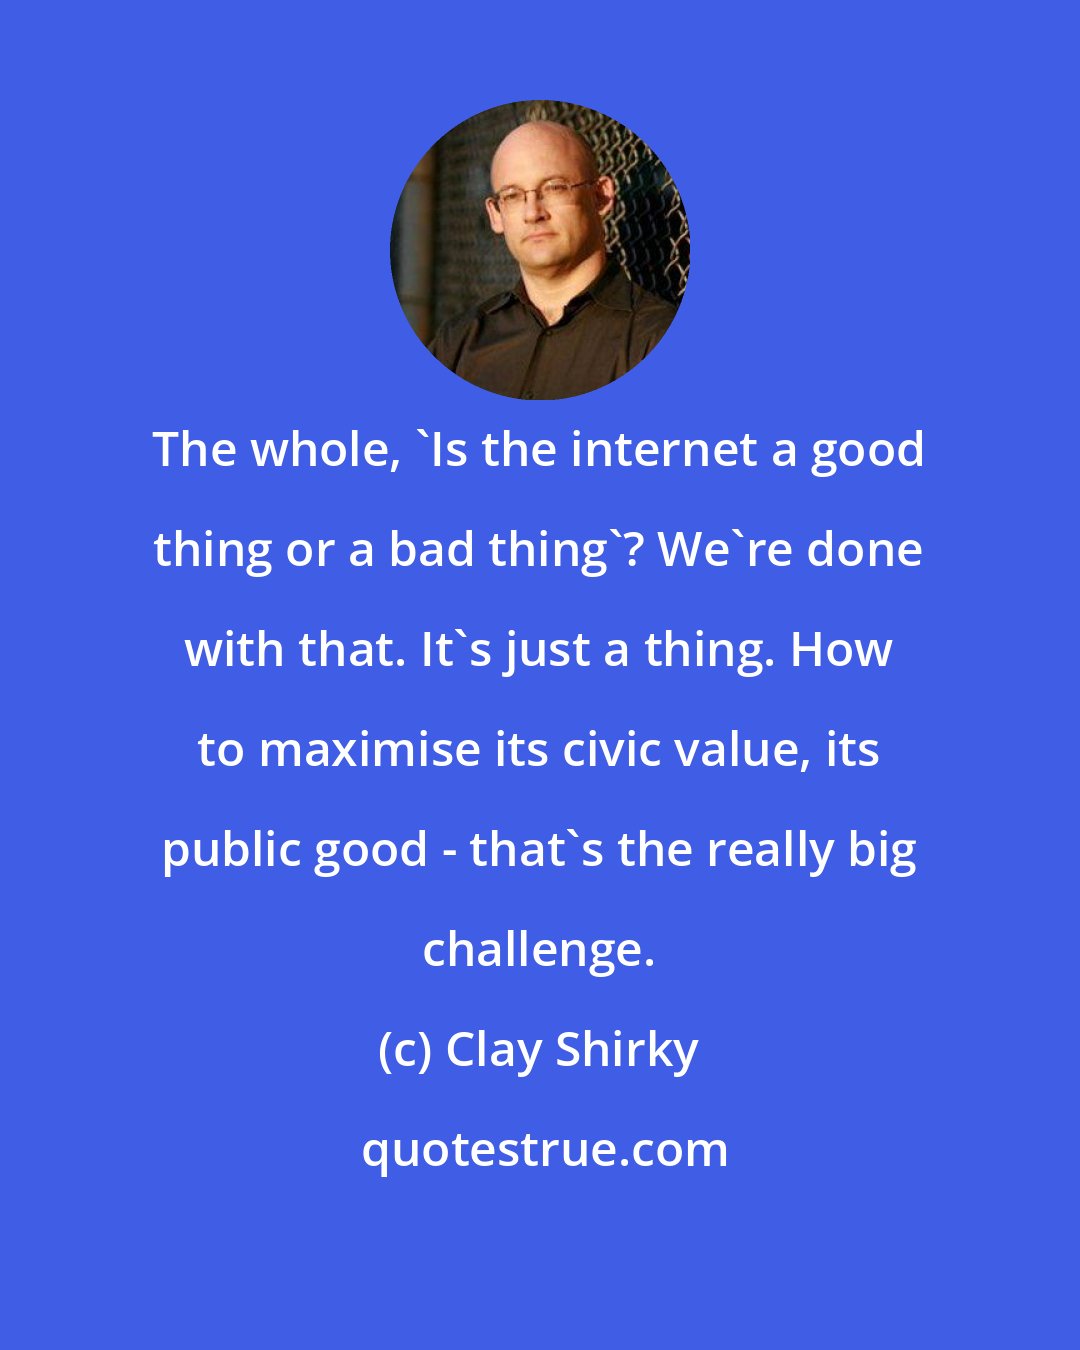 Clay Shirky: The whole, 'Is the internet a good thing or a bad thing'? We're done with that. It's just a thing. How to maximise its civic value, its public good - that's the really big challenge.